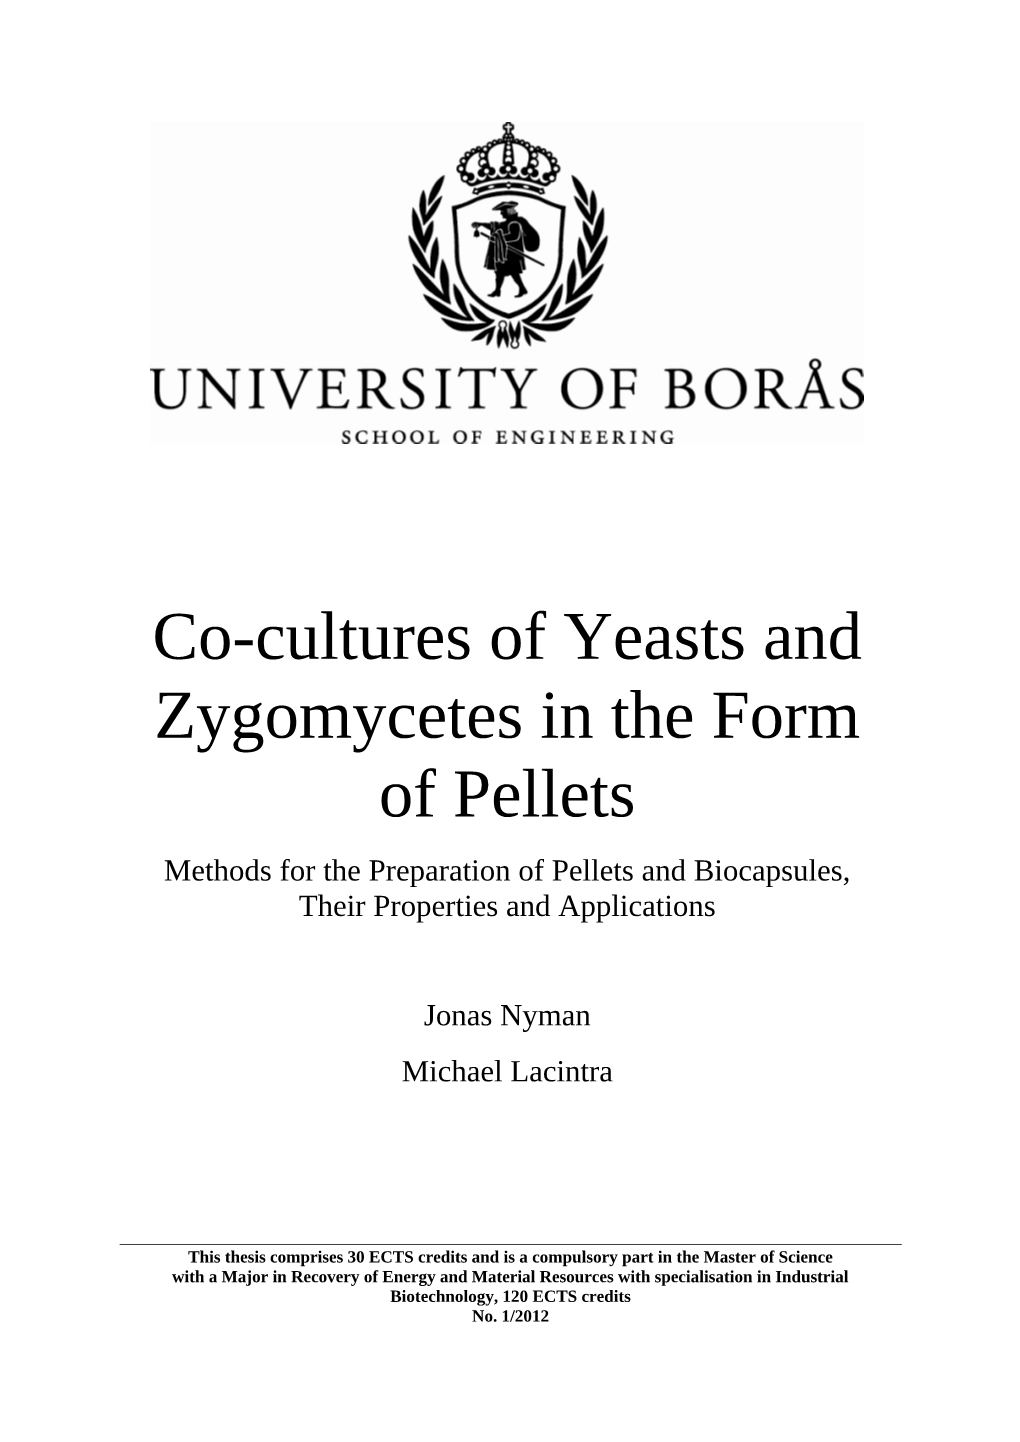 Co-Cultures of Yeasts and Zygomycetes in the Form of Pellets Methods for the Preparation of Pellets and Biocapsules, Their Properties and Applications